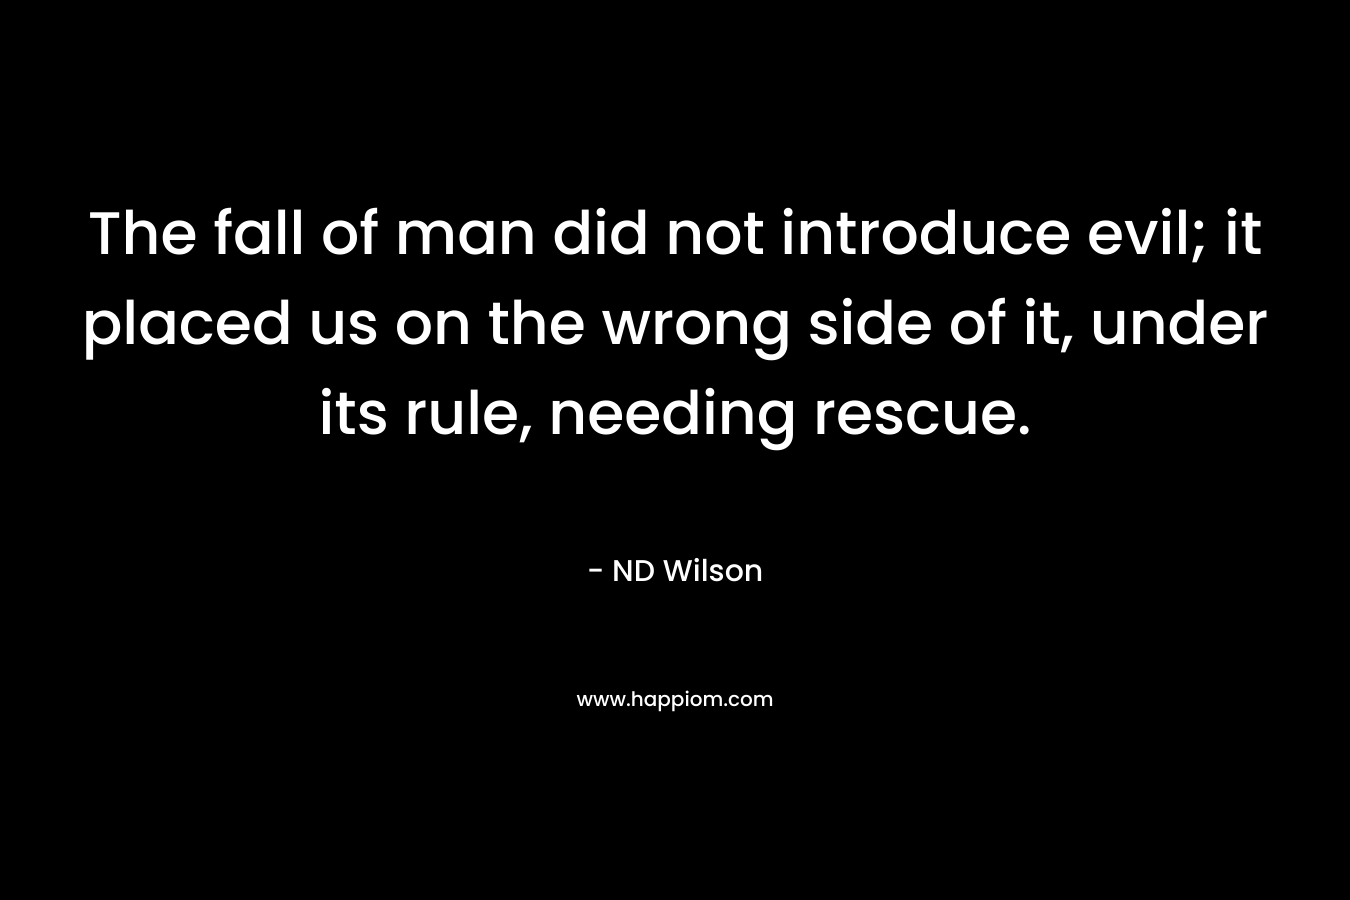 The fall of man did not introduce evil; it placed us on the wrong side of it, under its rule, needing rescue. – ND Wilson